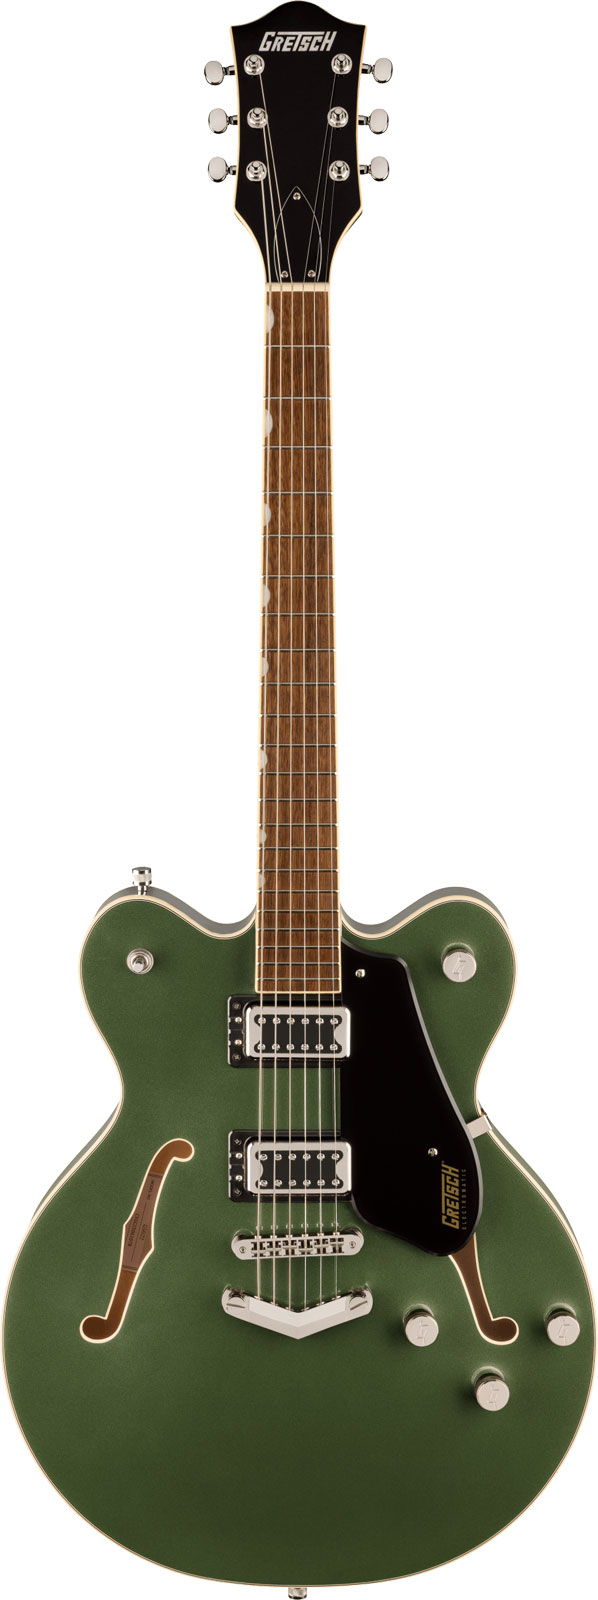 GRETSCH GUITARS G5622 ELECTROMATIC CENTER BLOCK DOUBLE-CUT WITH V-STOPTAIL